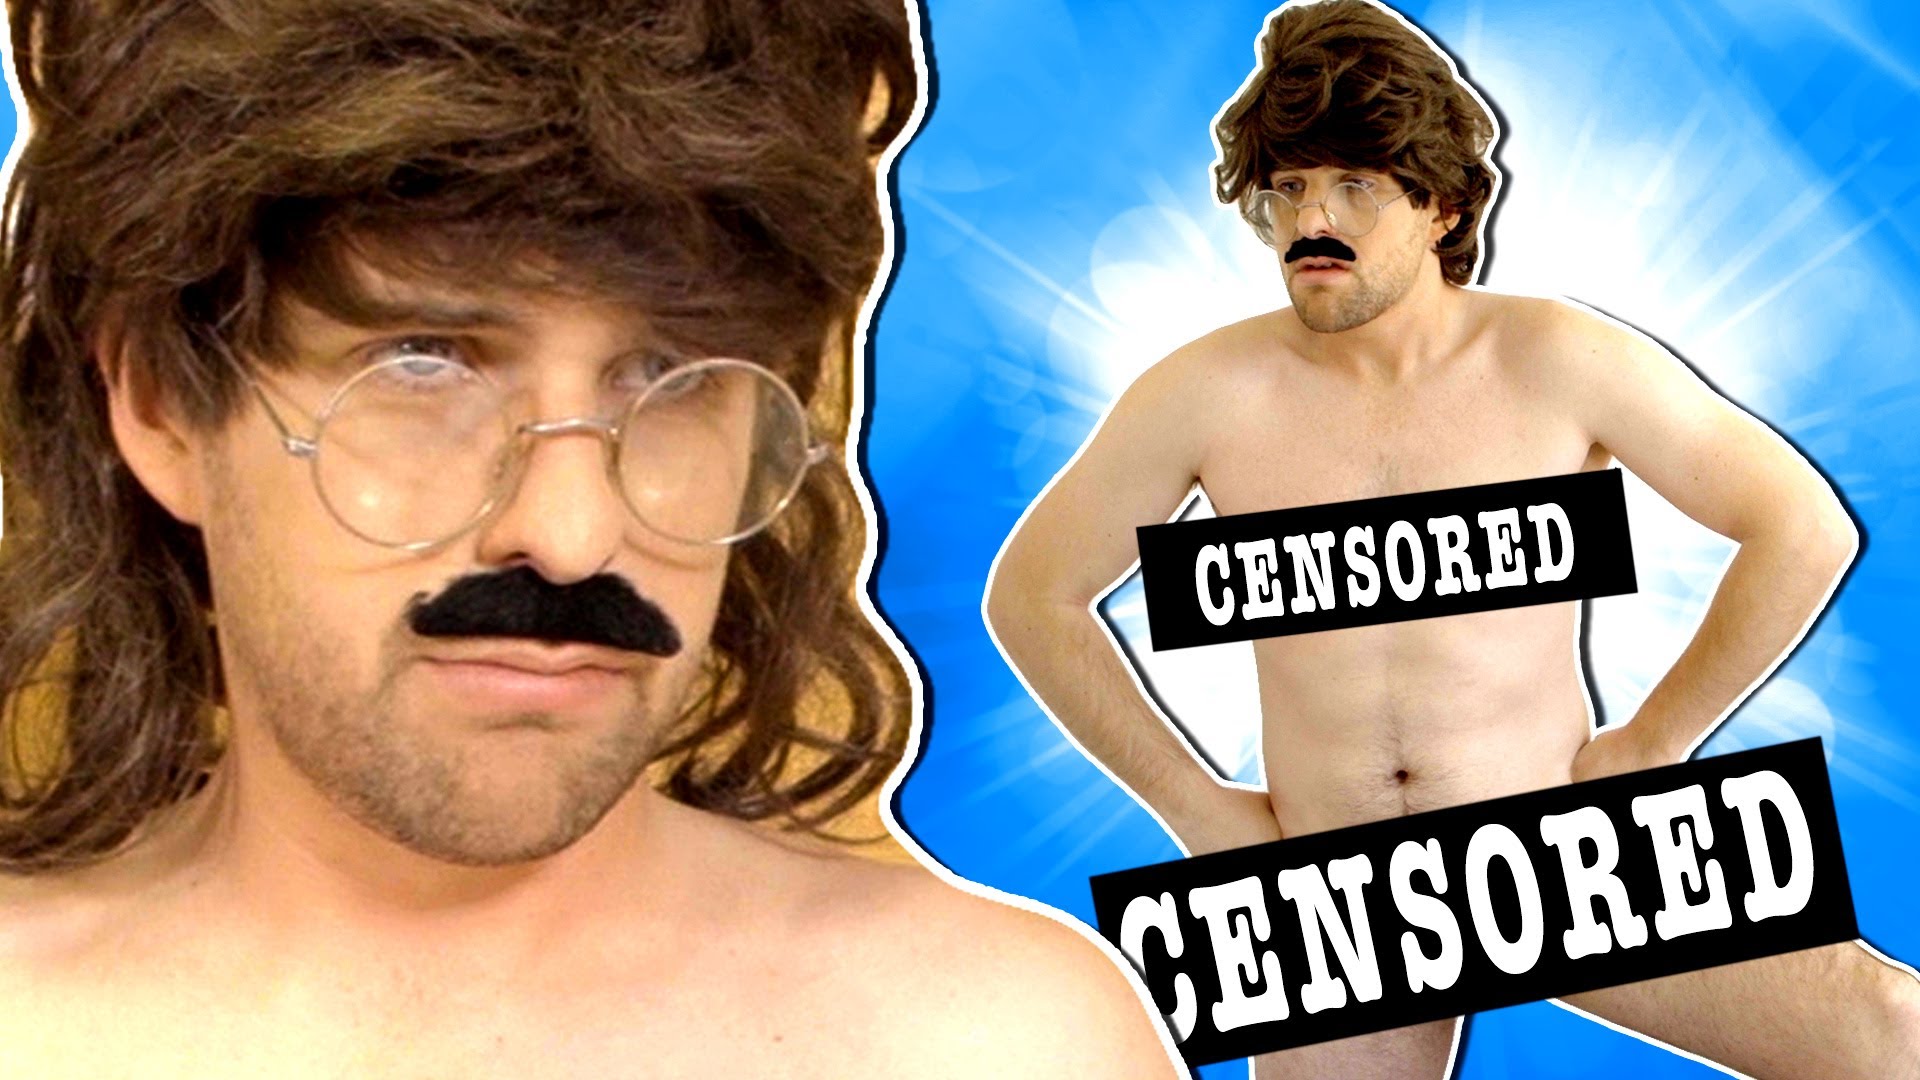 Creepy Weird Nudist is a Smosh video uploaded in 2014 and is the second epi...